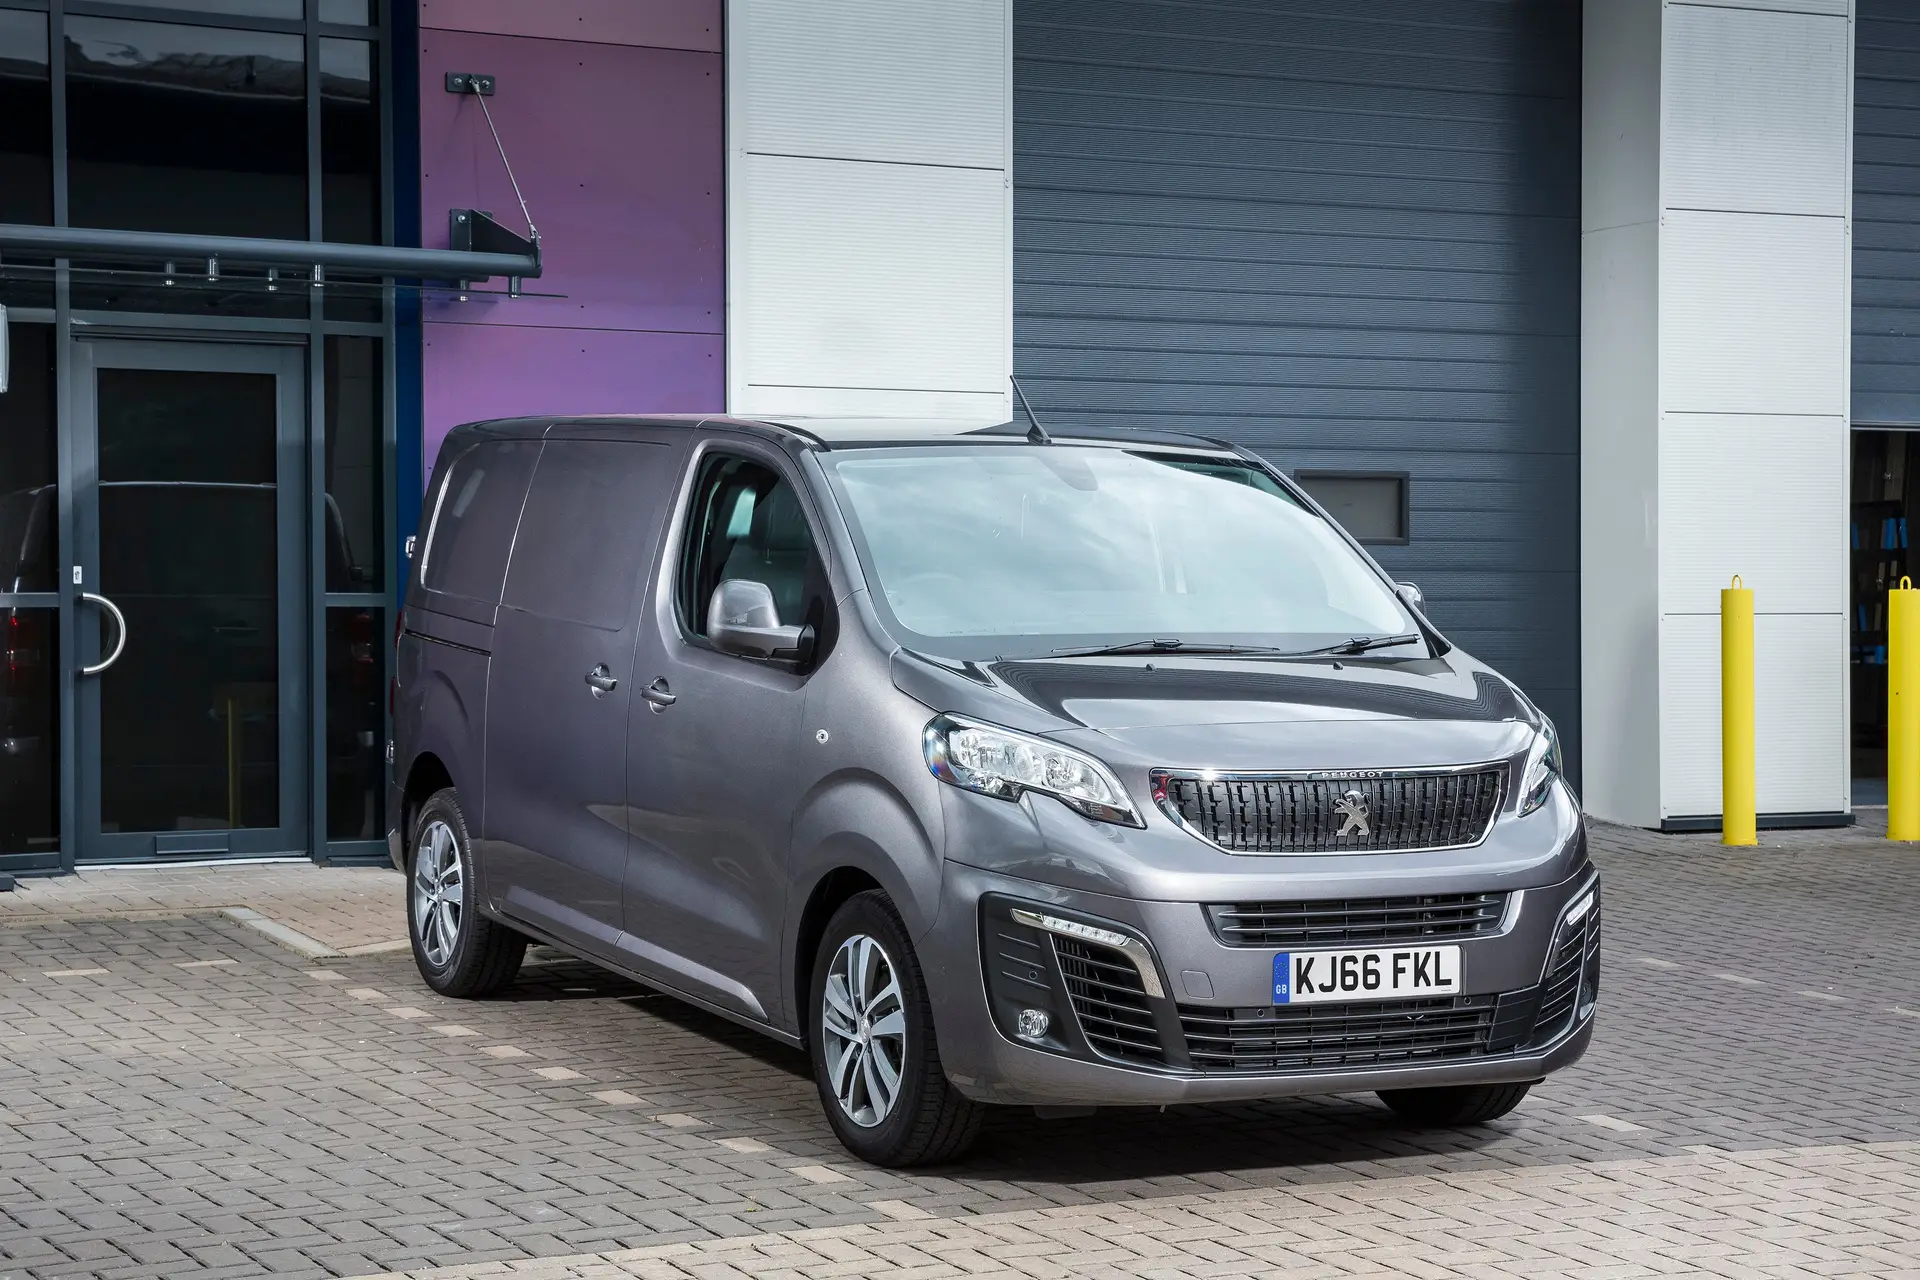 2019 Peugeot Expert price and features